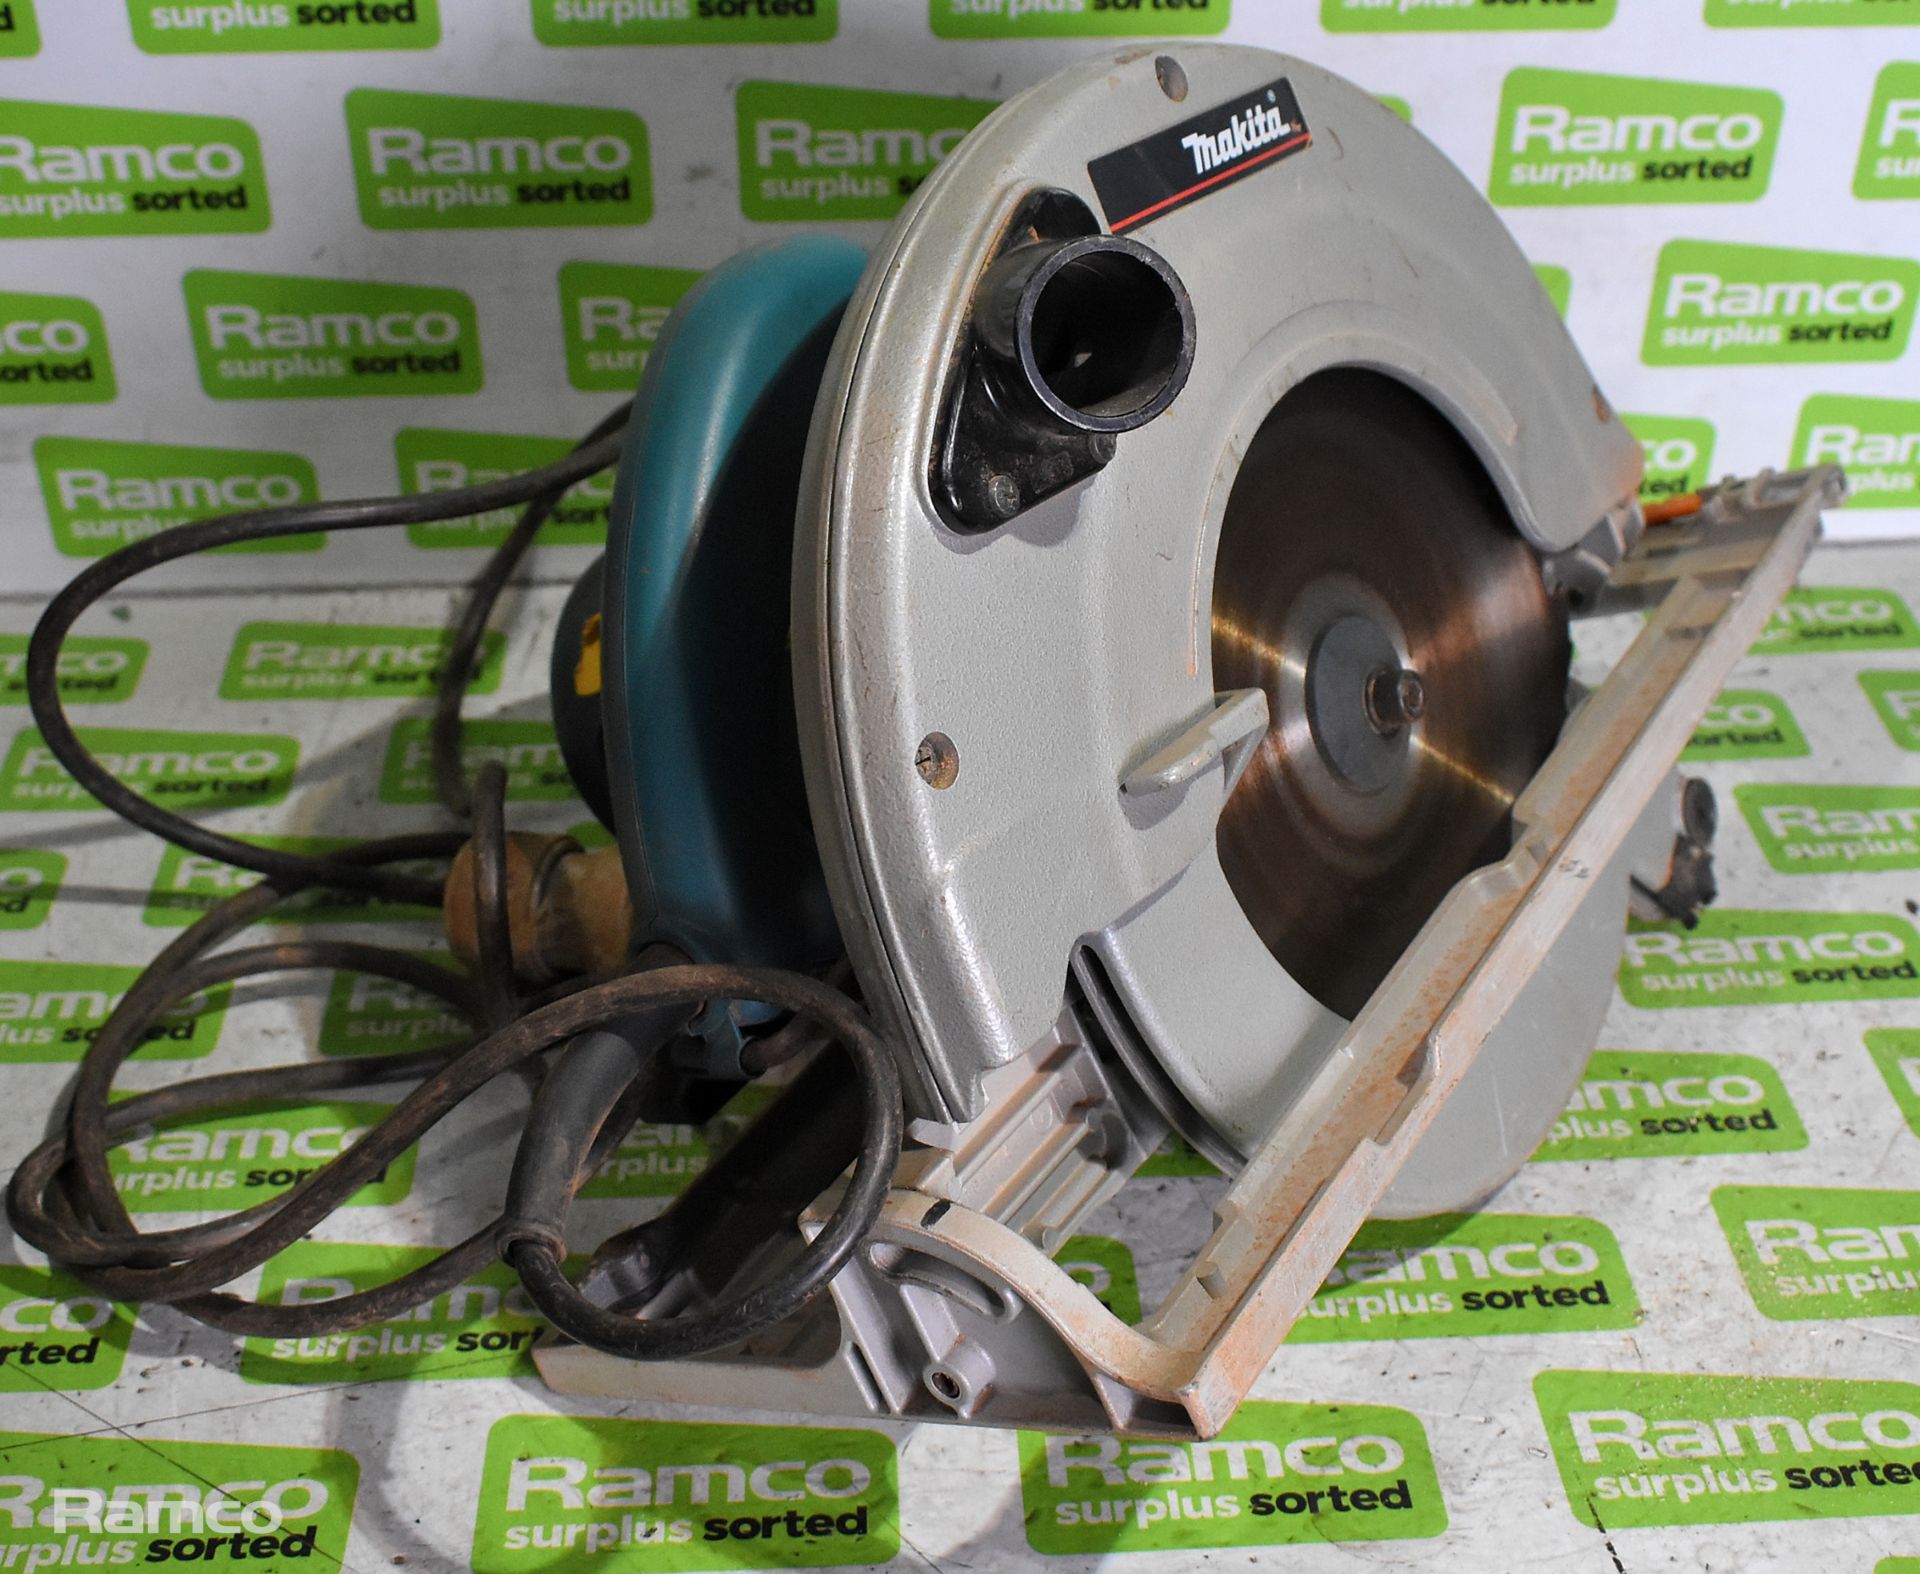 Makita 5903R 110V circular saw 1550W - 235mm blade with case - Image 4 of 10